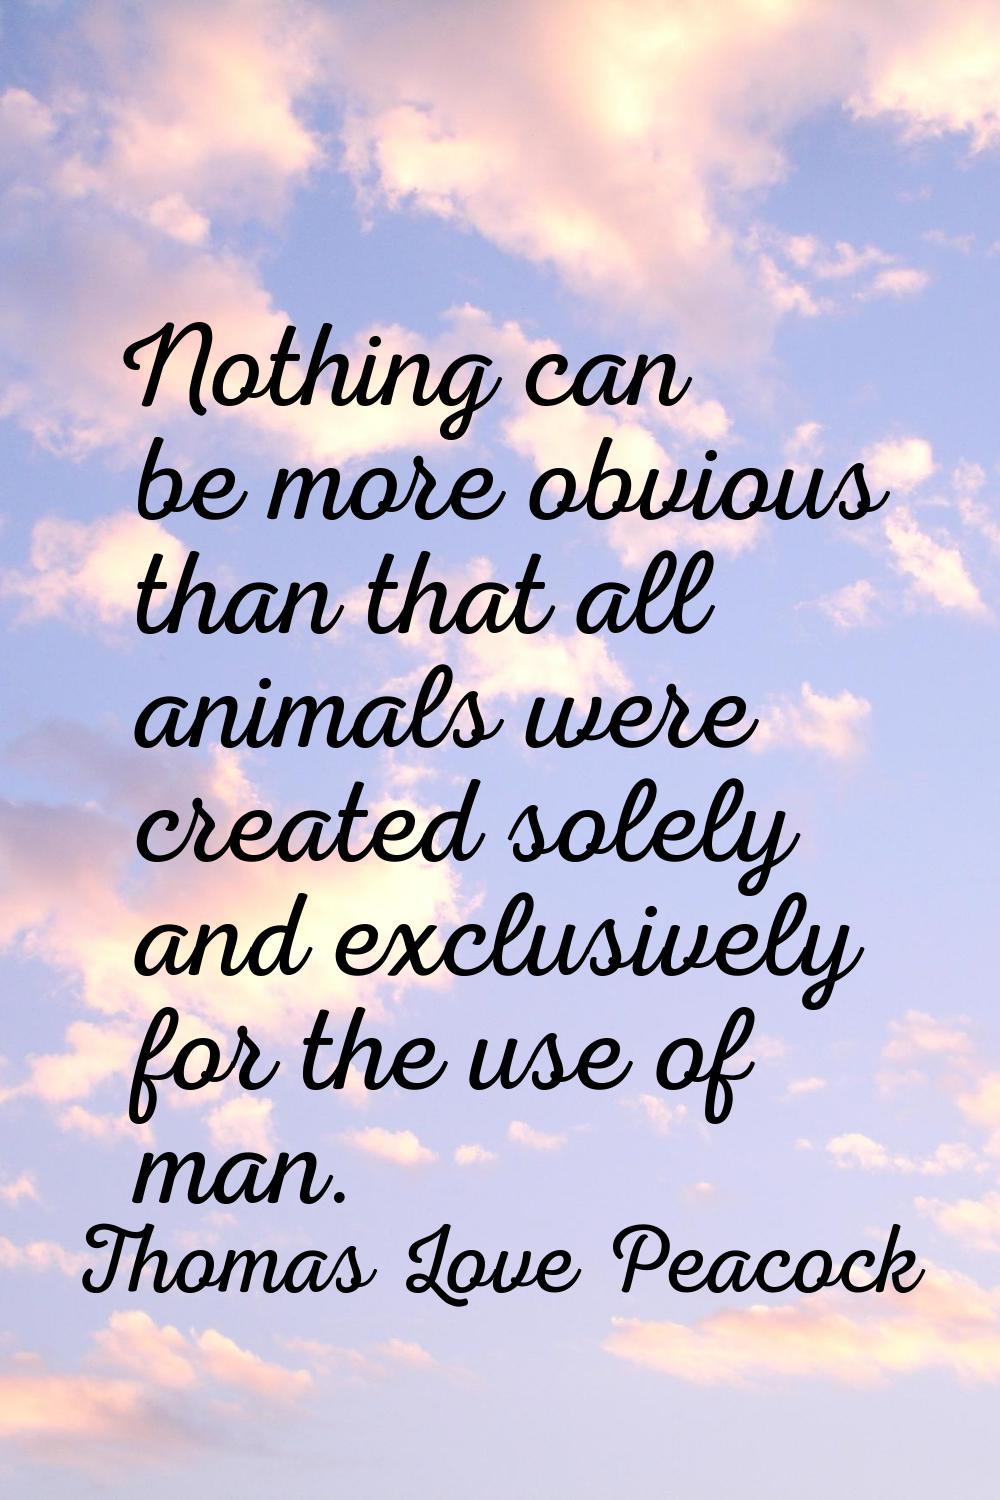 Nothing can be more obvious than that all animals were created solely and exclusively for the use o